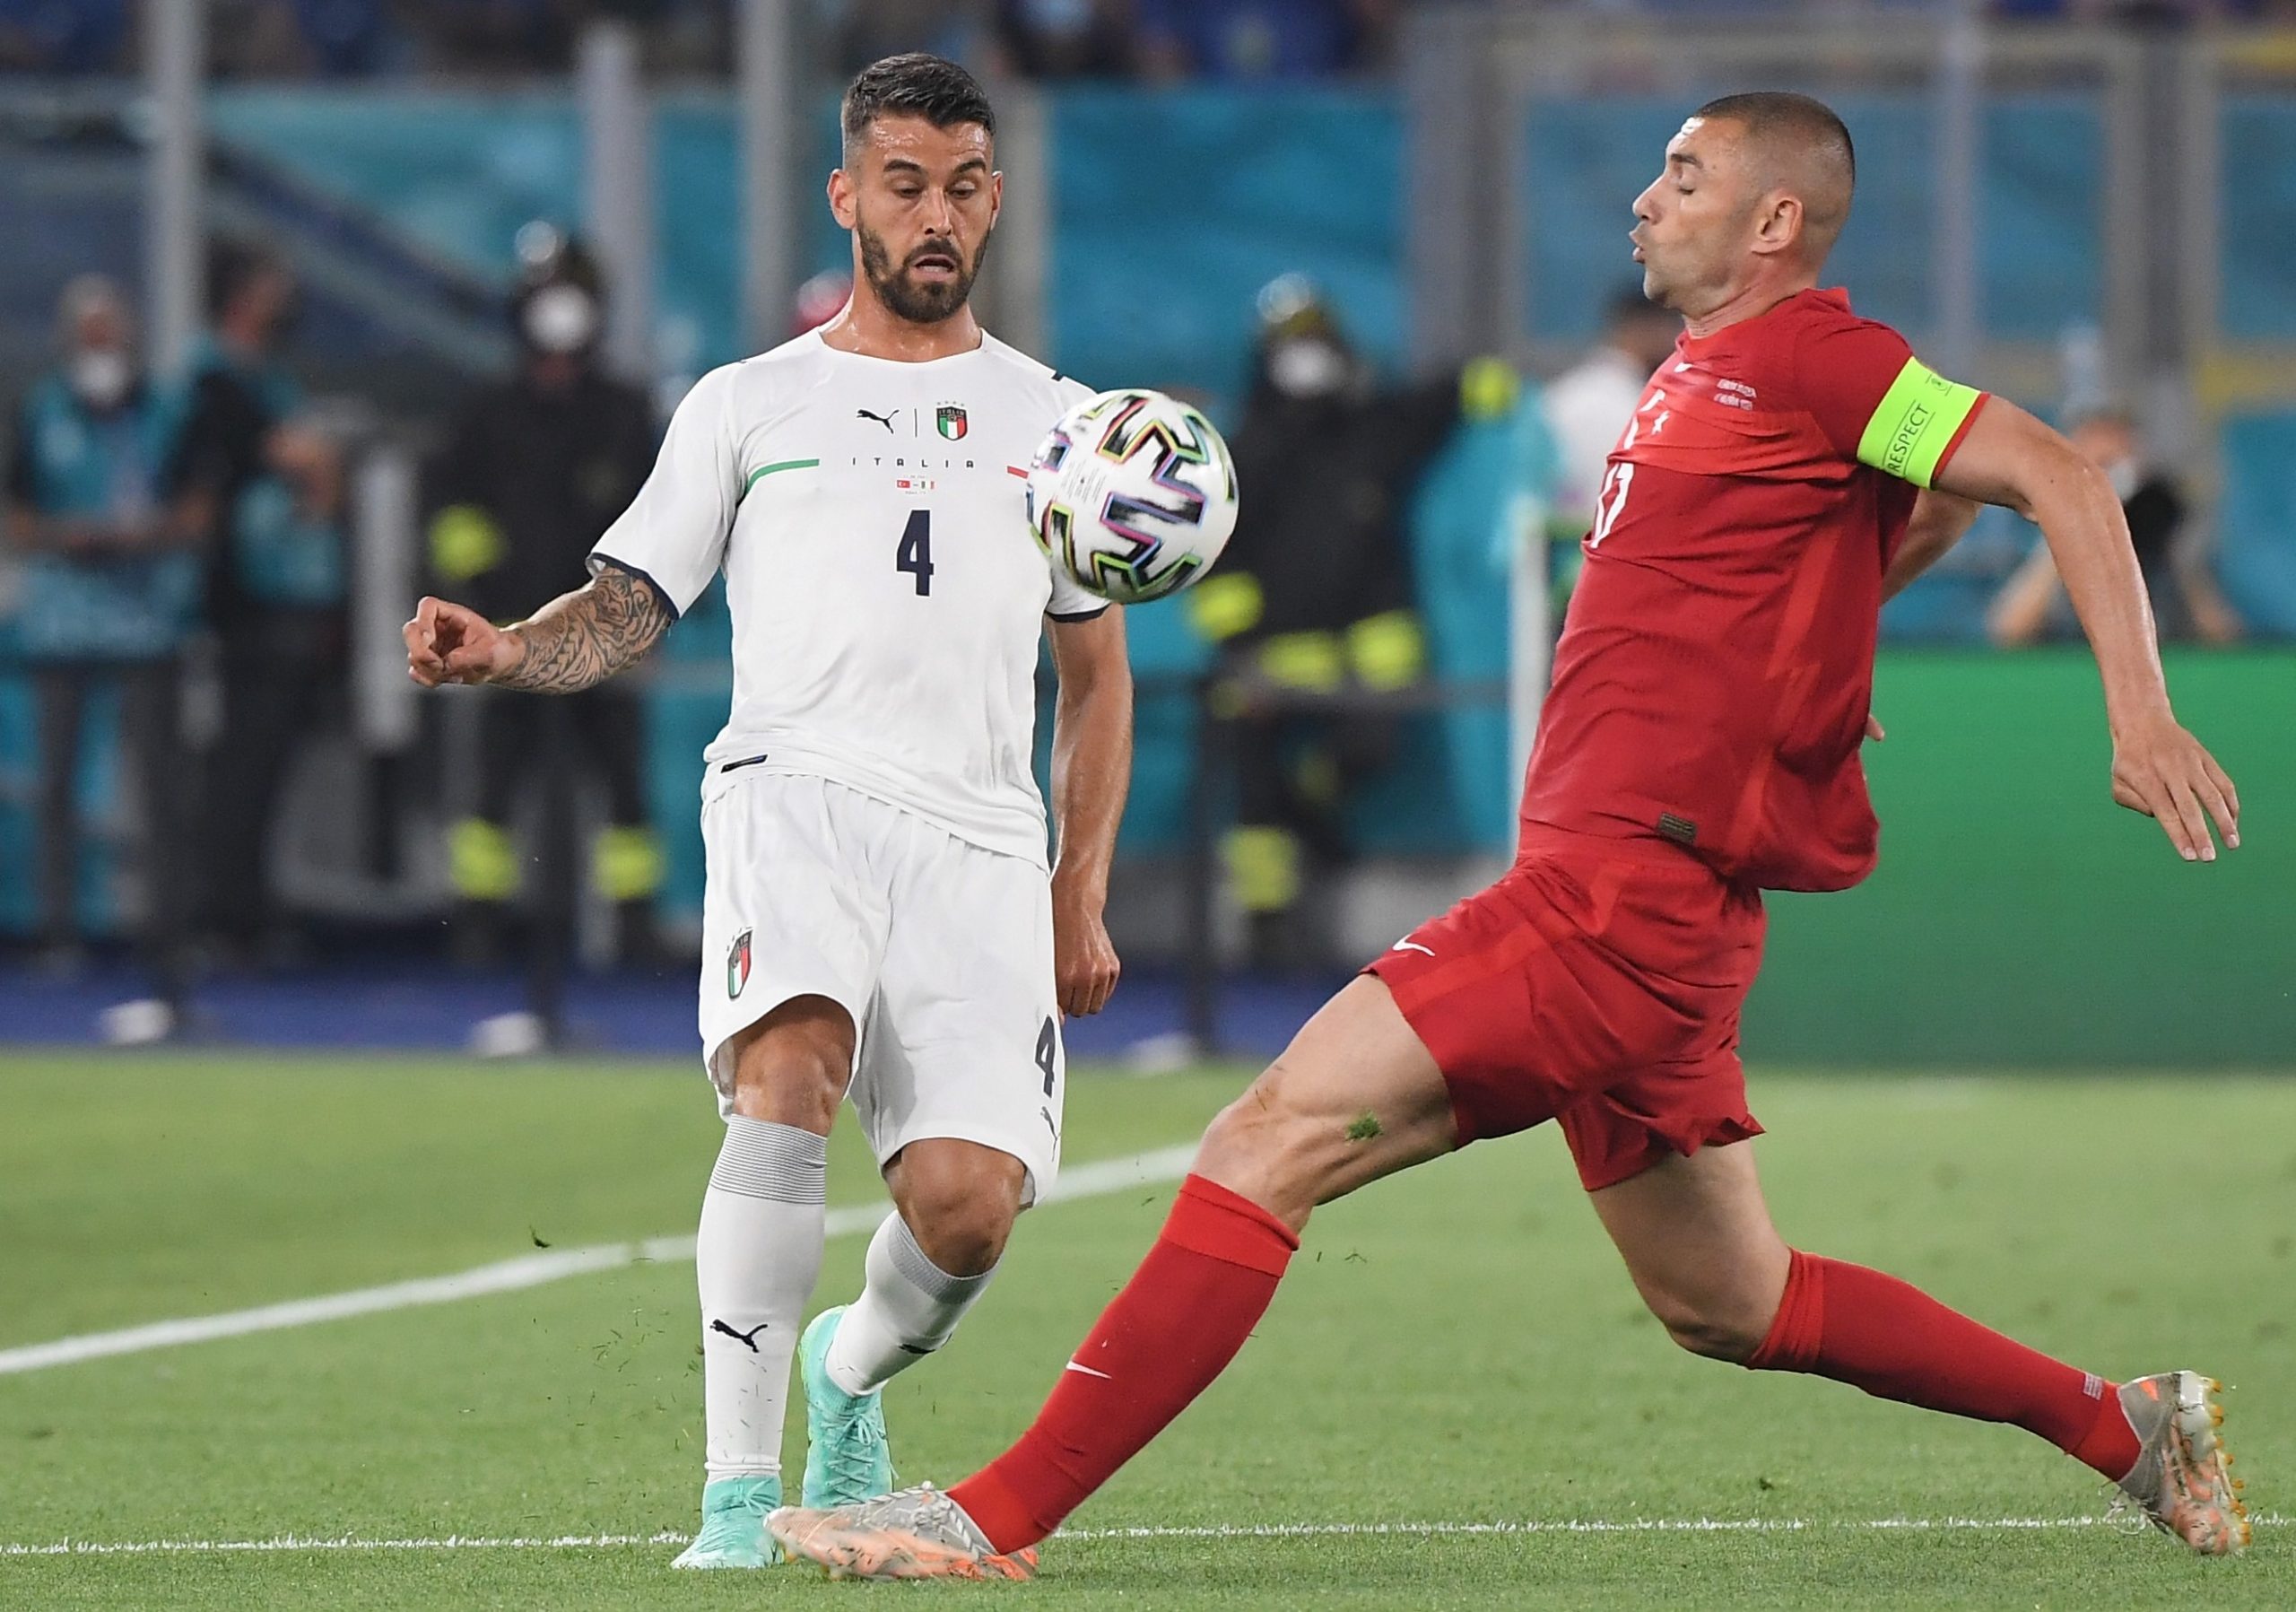 epa09263152 Burak Yilmaz (R) of Turkey in action against Leonardo Spinazzola of Italy during the UEFA EURO 2020 group A preliminary round soccer match between Turkey and Italy at the Olympic Stadium in Rome, Italy, 11 June 2021.  EPA/Alberto Lingria / POOL (RESTRICTIONS: For editorial news reporting purposes only. Images must appear as still images and must not emulate match action video footage. Photographs published in online publications shall have an interval of at least 20 seconds between the posting.)